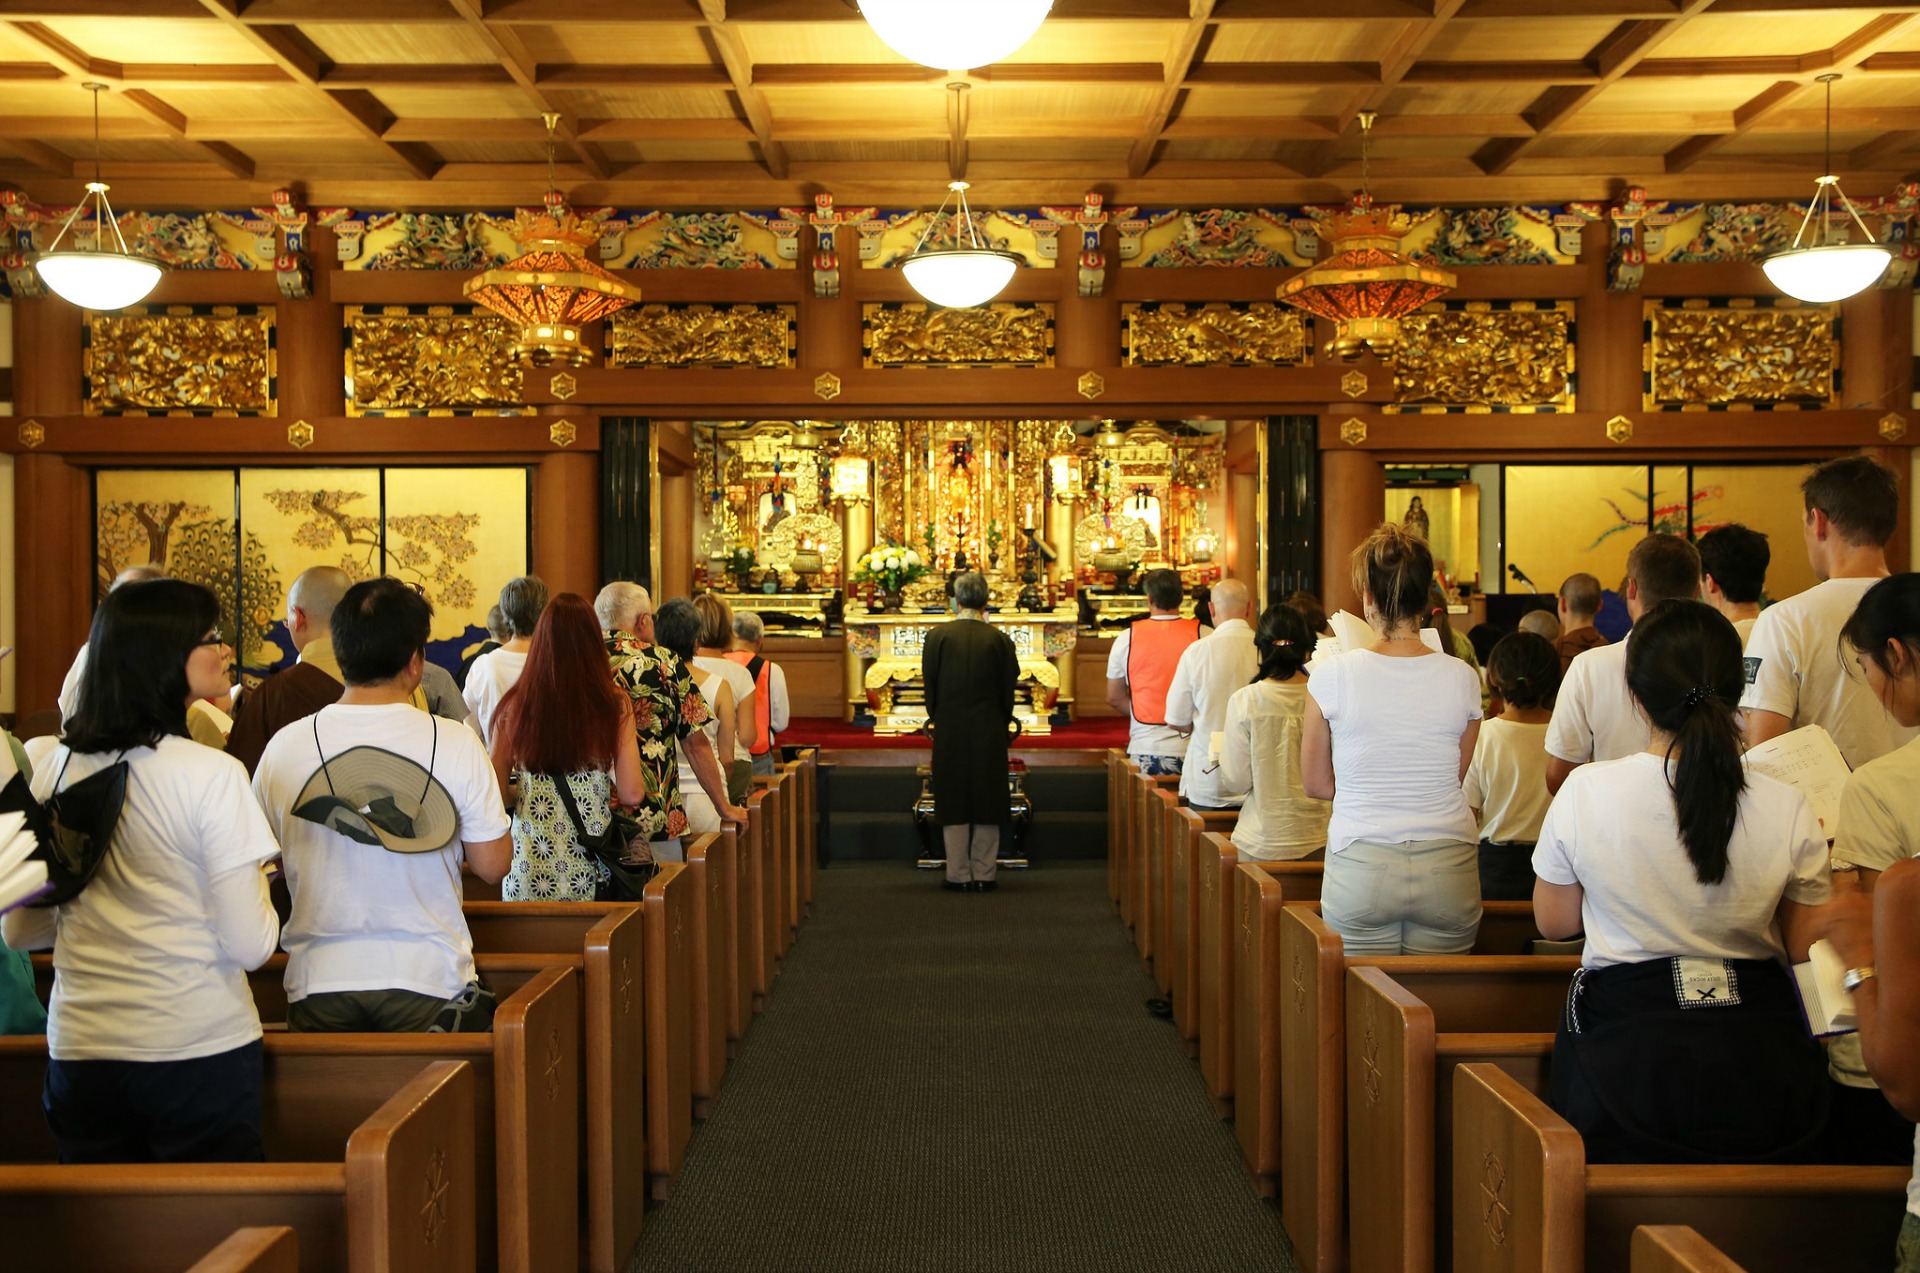 Last year's group at the Buddhist Church of San Francisco, where Rev. Ronald K. Kobata is leading them in devotional chanting